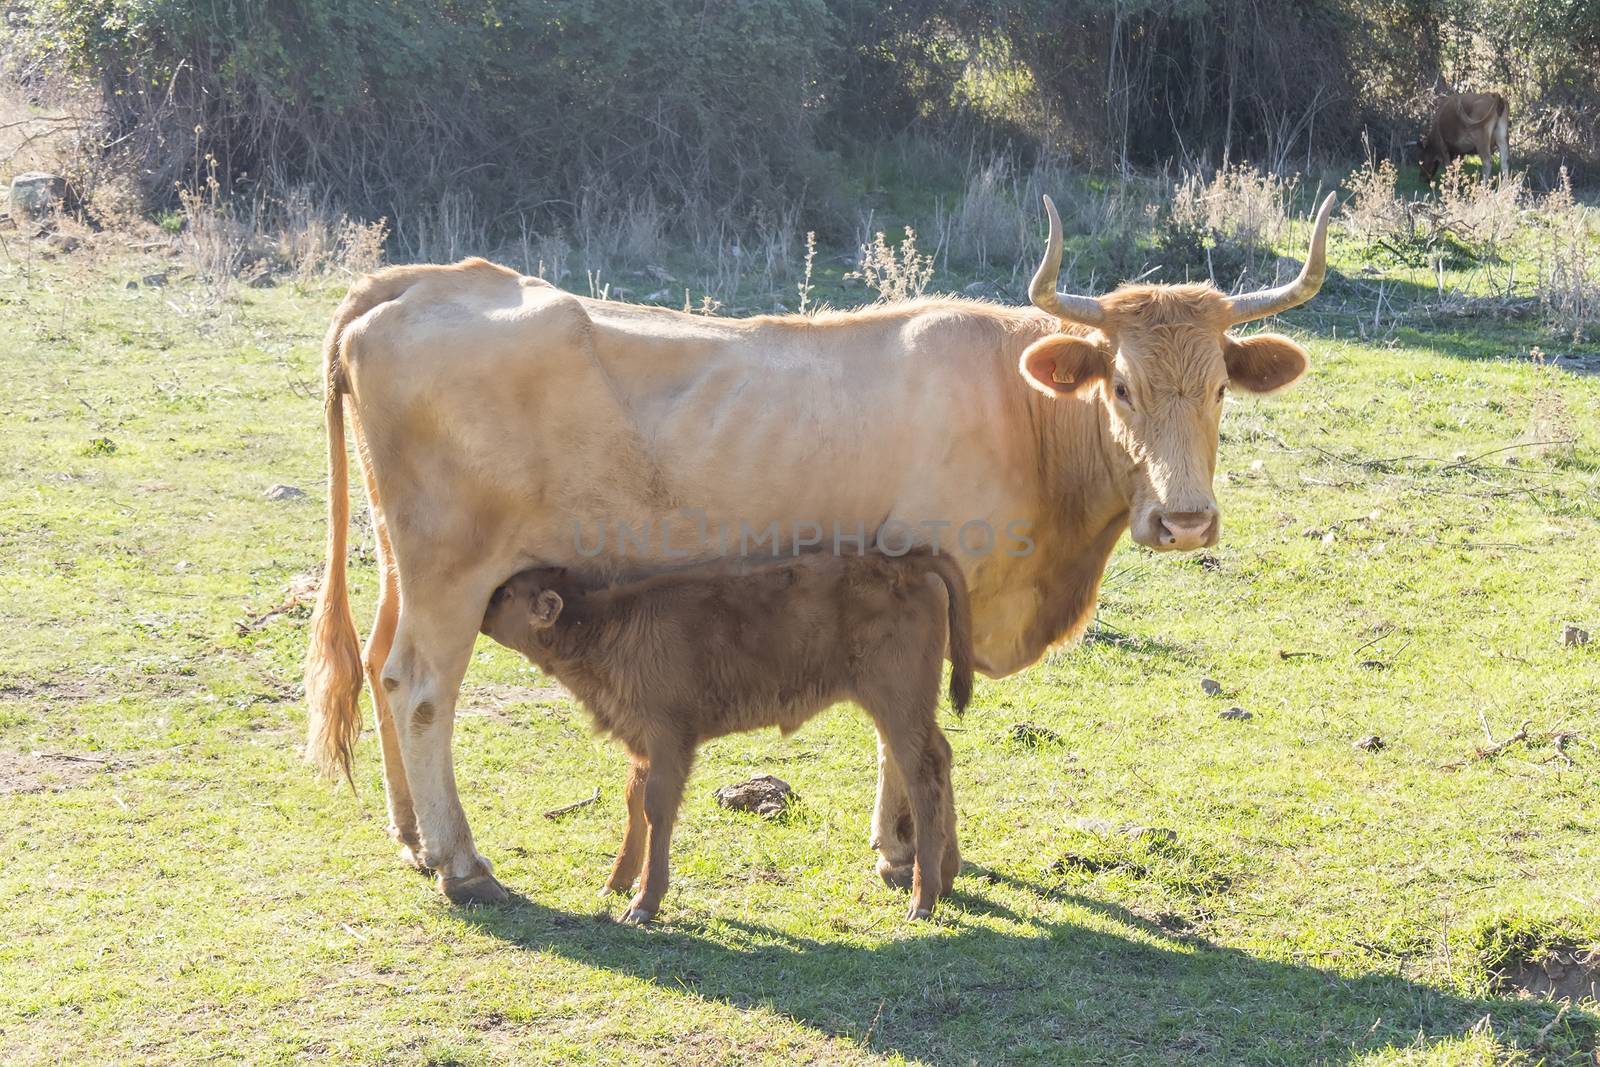 Calf sucking on her mother's udder by max8xam